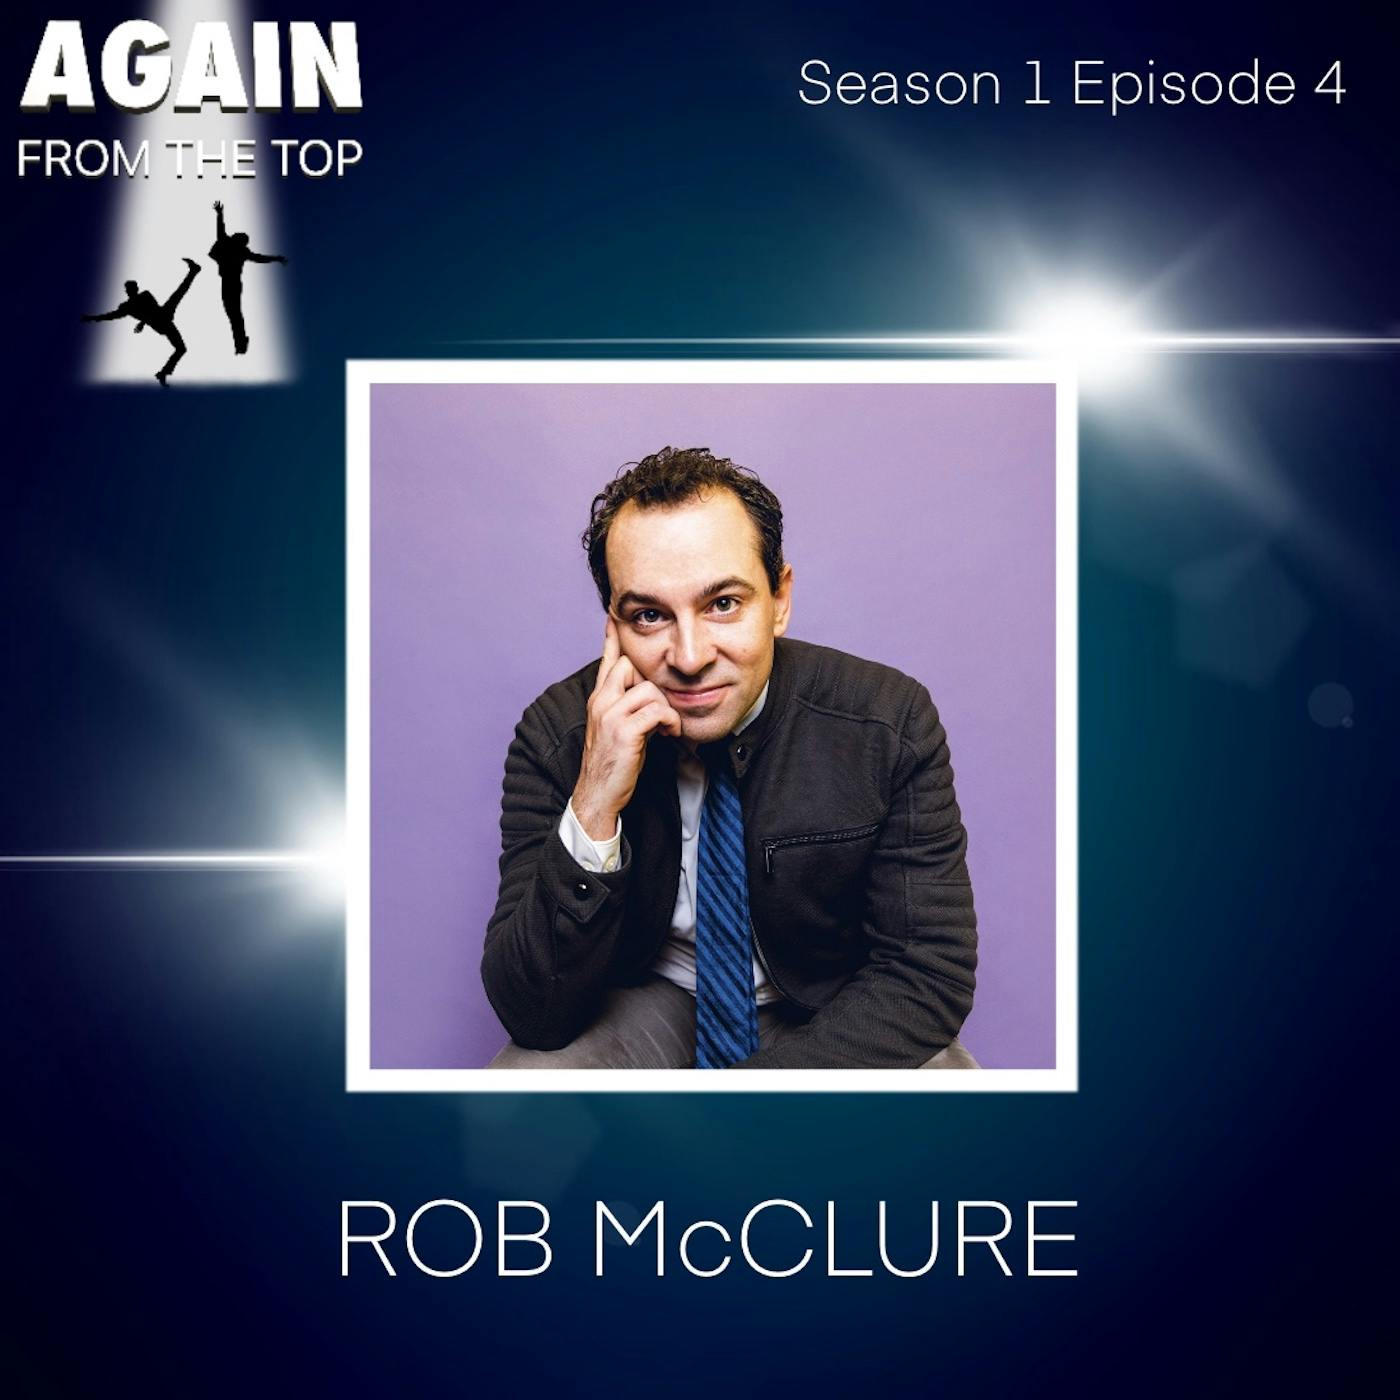 S1/Ep4: ROB McCLURE! WHAT CAN’T THIS MAN DO?